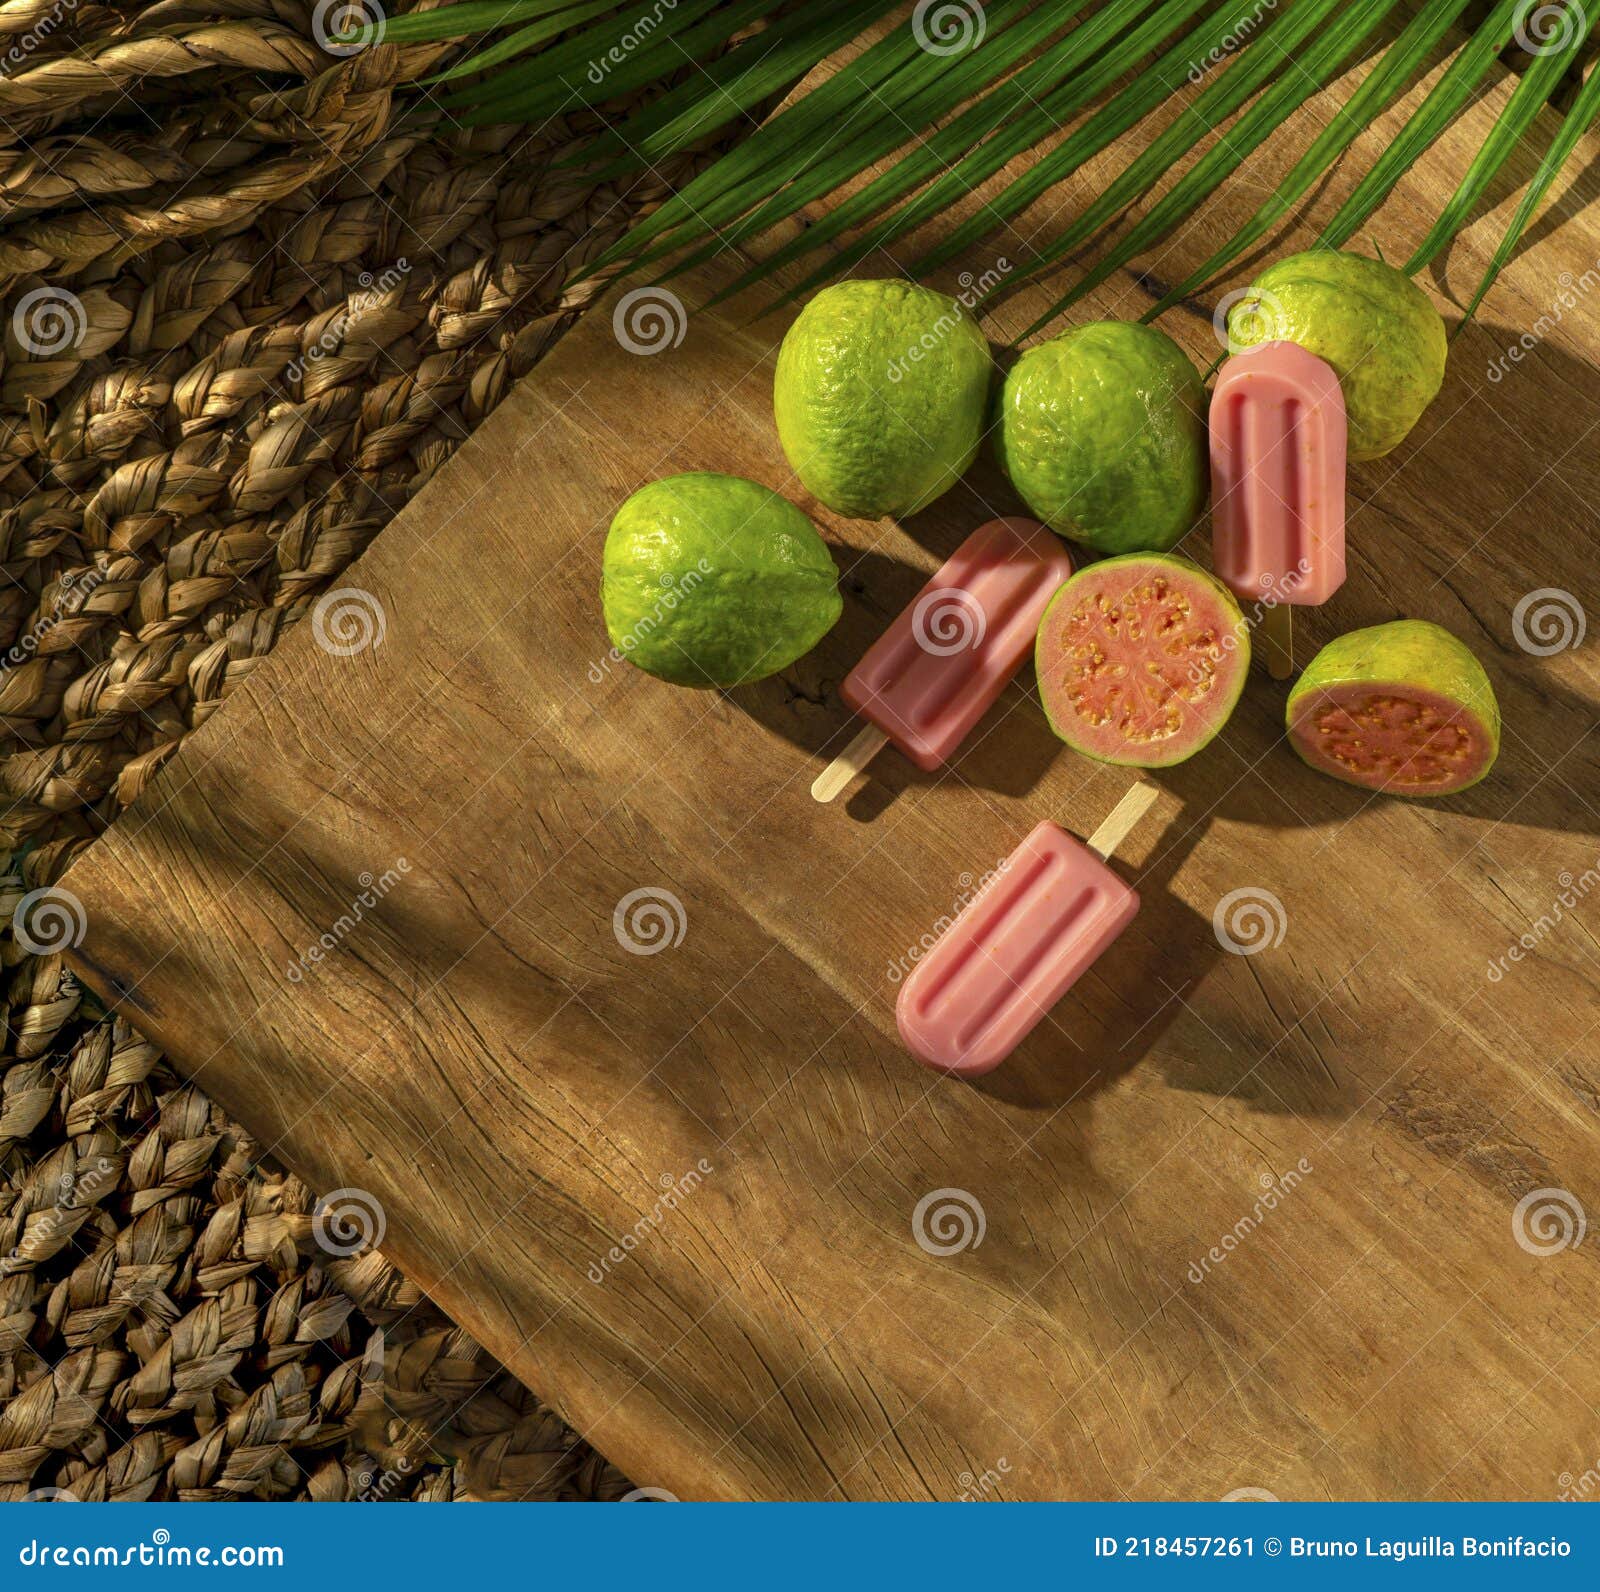 guava popsicle with grava fruits on a wood base, sunlight, palm leaf, top view